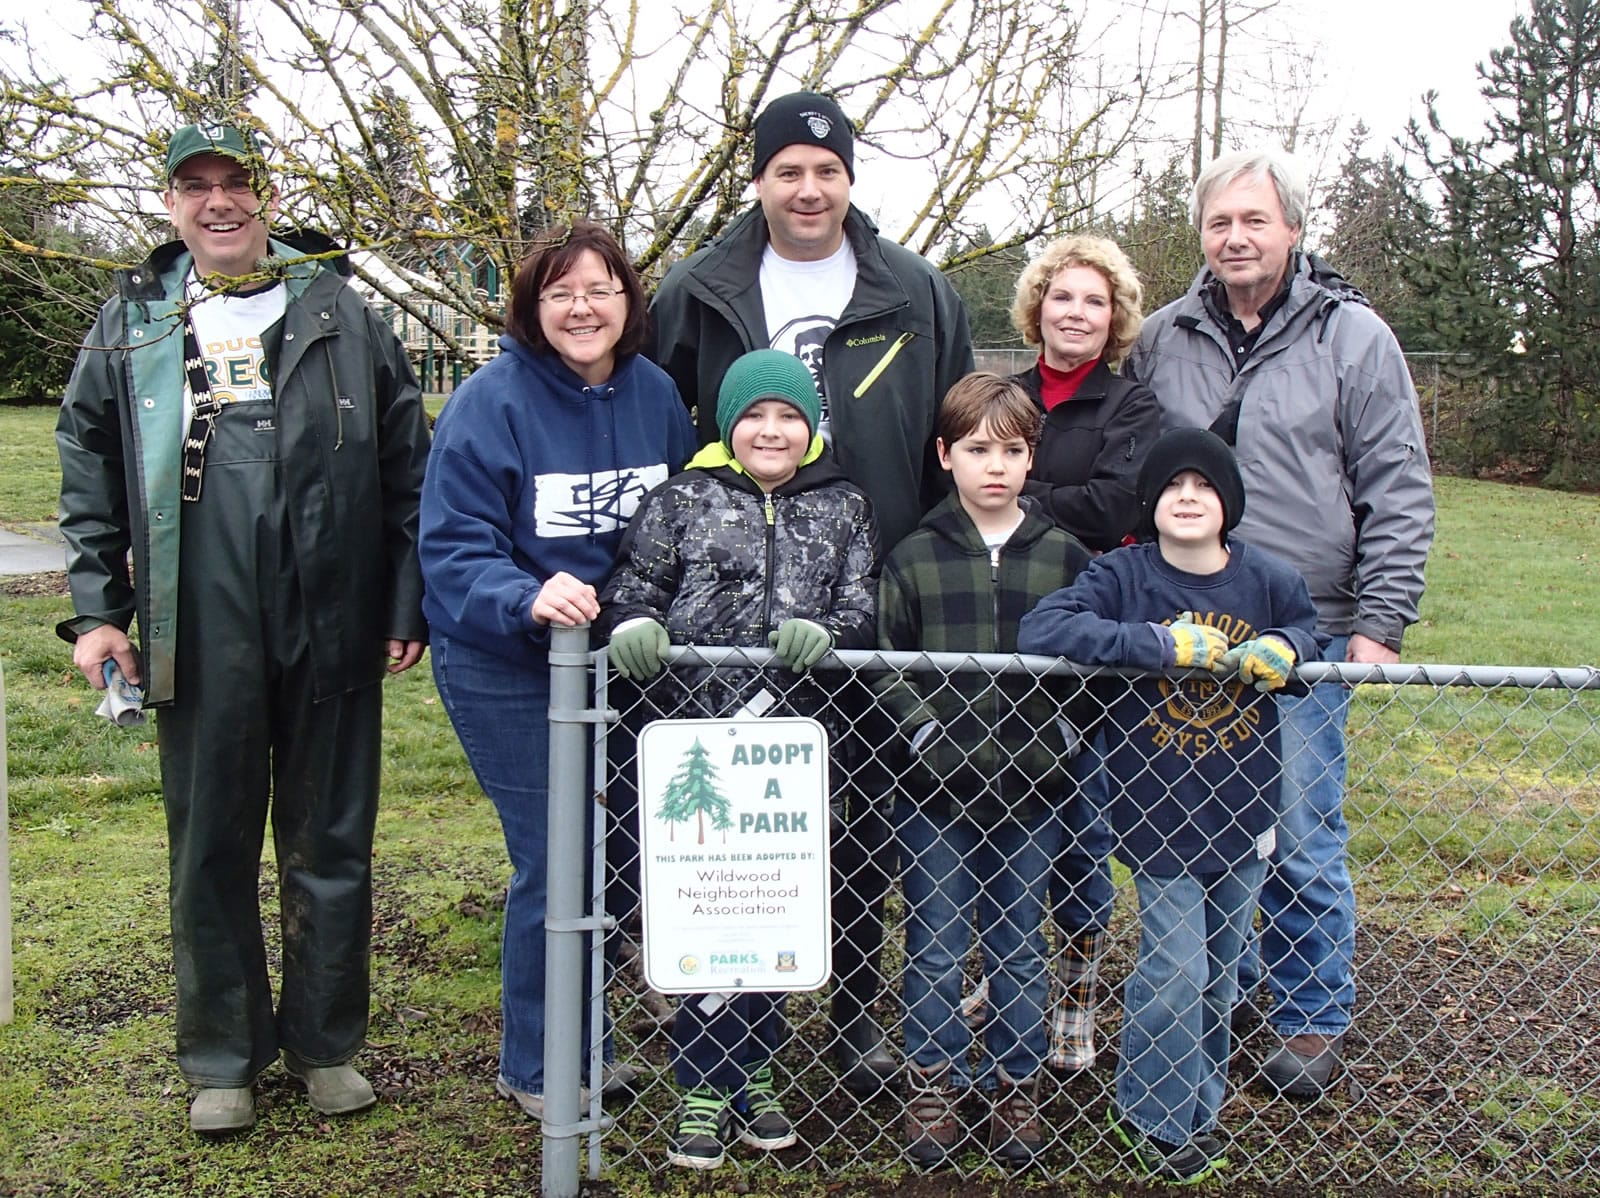 Volunteers from the Wildwood Neighborhood Association gather around the new Adopt-a-Park sign at the Wildwood Neighborhood Park in Vancouver. From rear left are John Gray, Judi Bailey, Shane Gardner, Charlotte Lamb and Charles Lamb. From front left are Kaden Gardner, Jack Nagel and Elias Gardner.